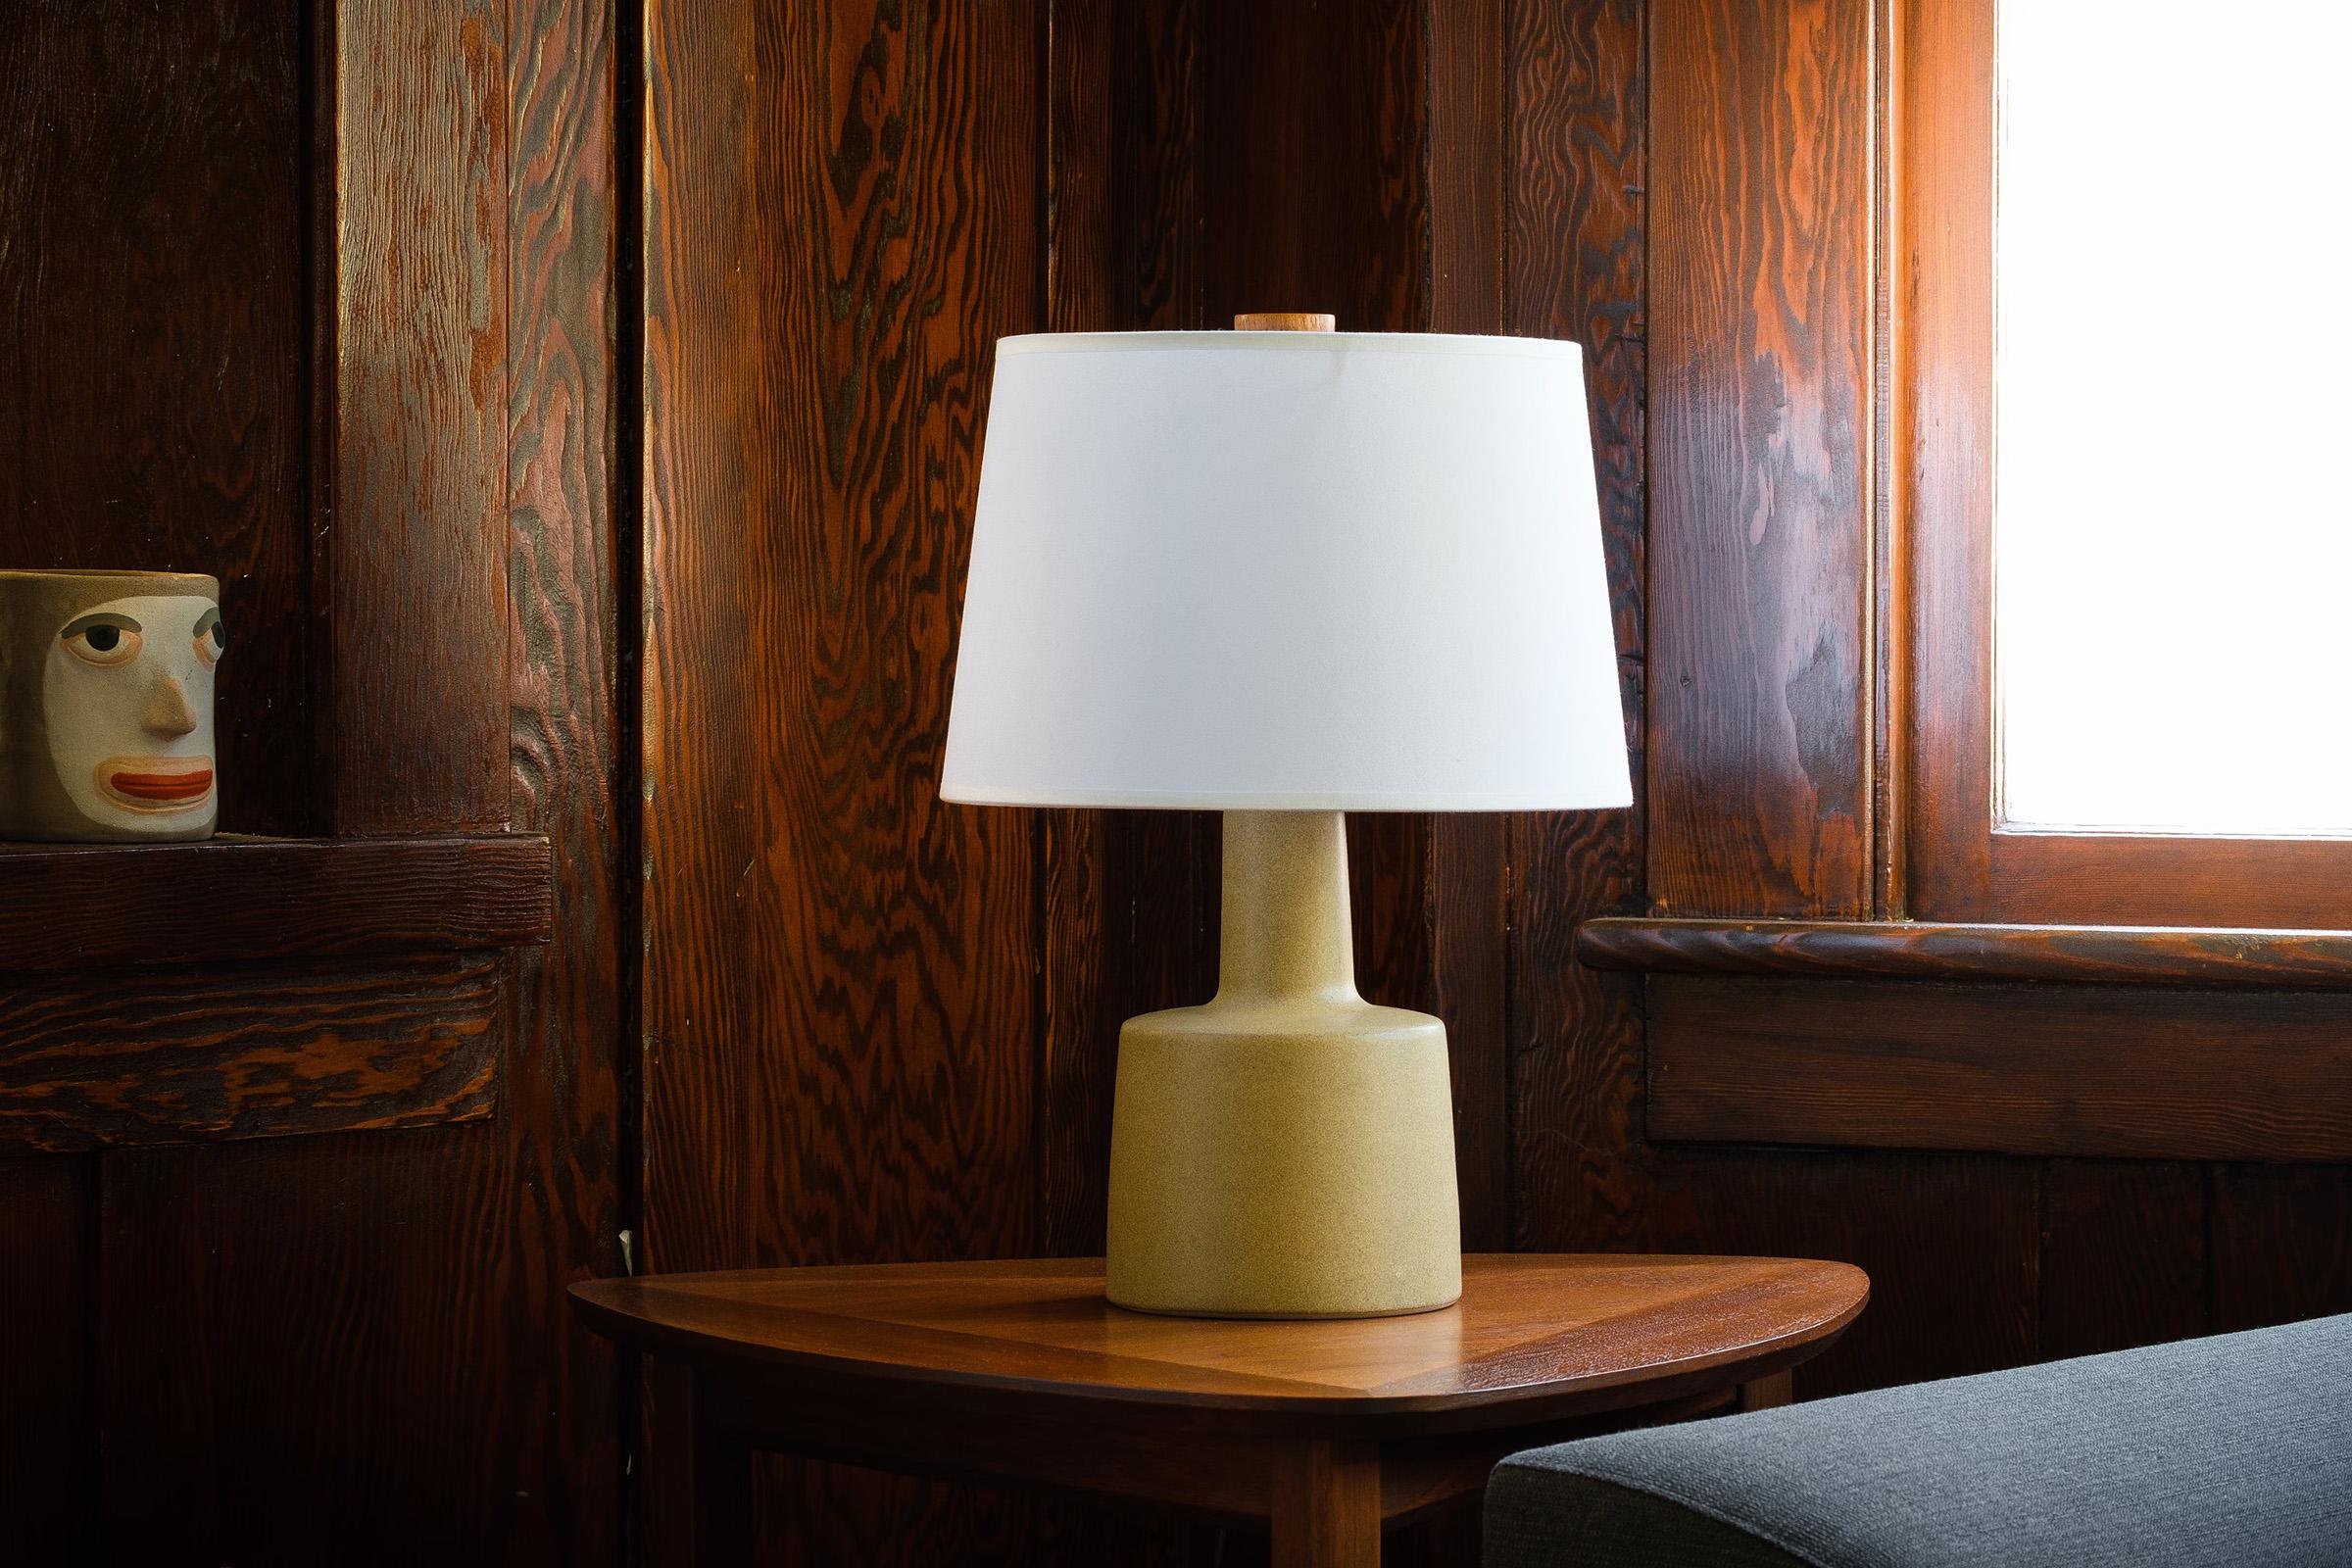 What is it?
—
Another gem from the masters of mid century lightning – Gordon and Jane Martz.

This signed Martz model 105 lamp comes in a matte yellow glaze with darker flecks and specks of browns and black. The overall color tone is hard to pin